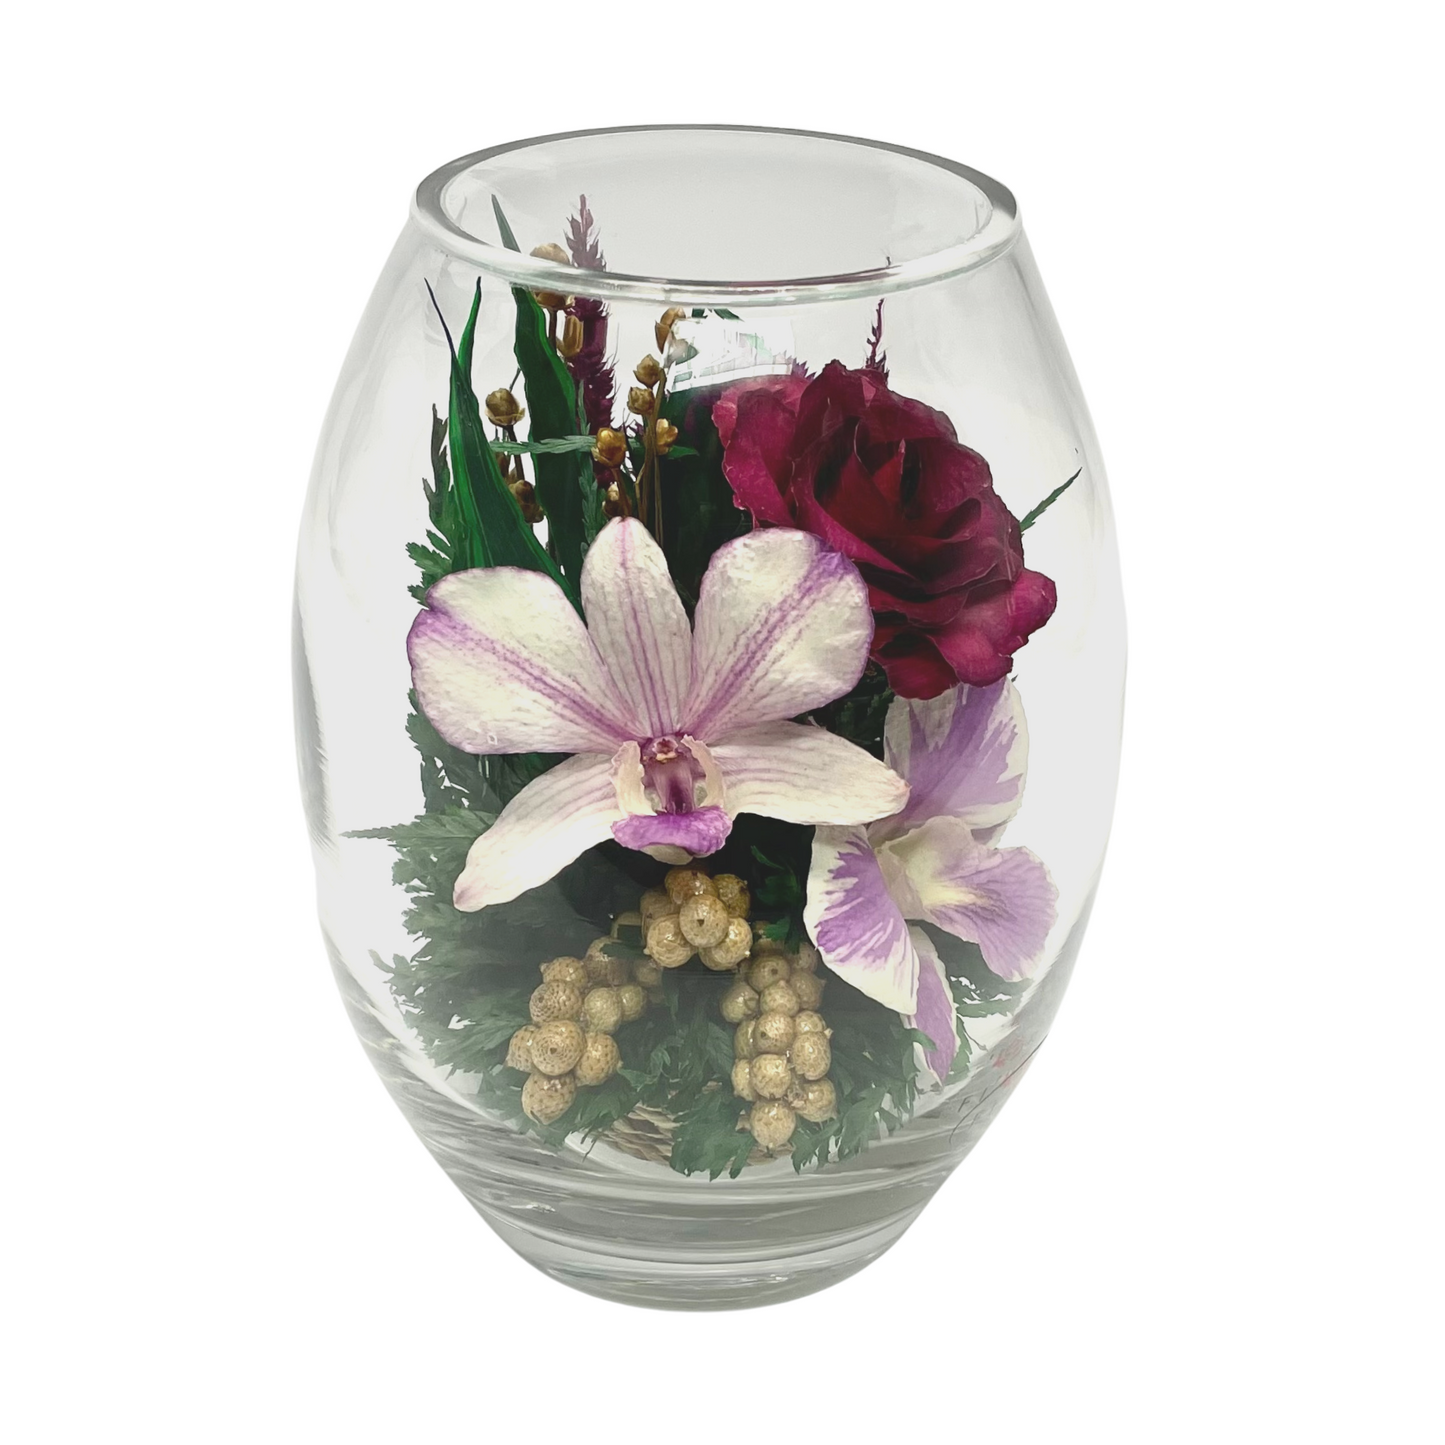 71836 Long-Lasting Roses and Orchids, in a Glass Vase